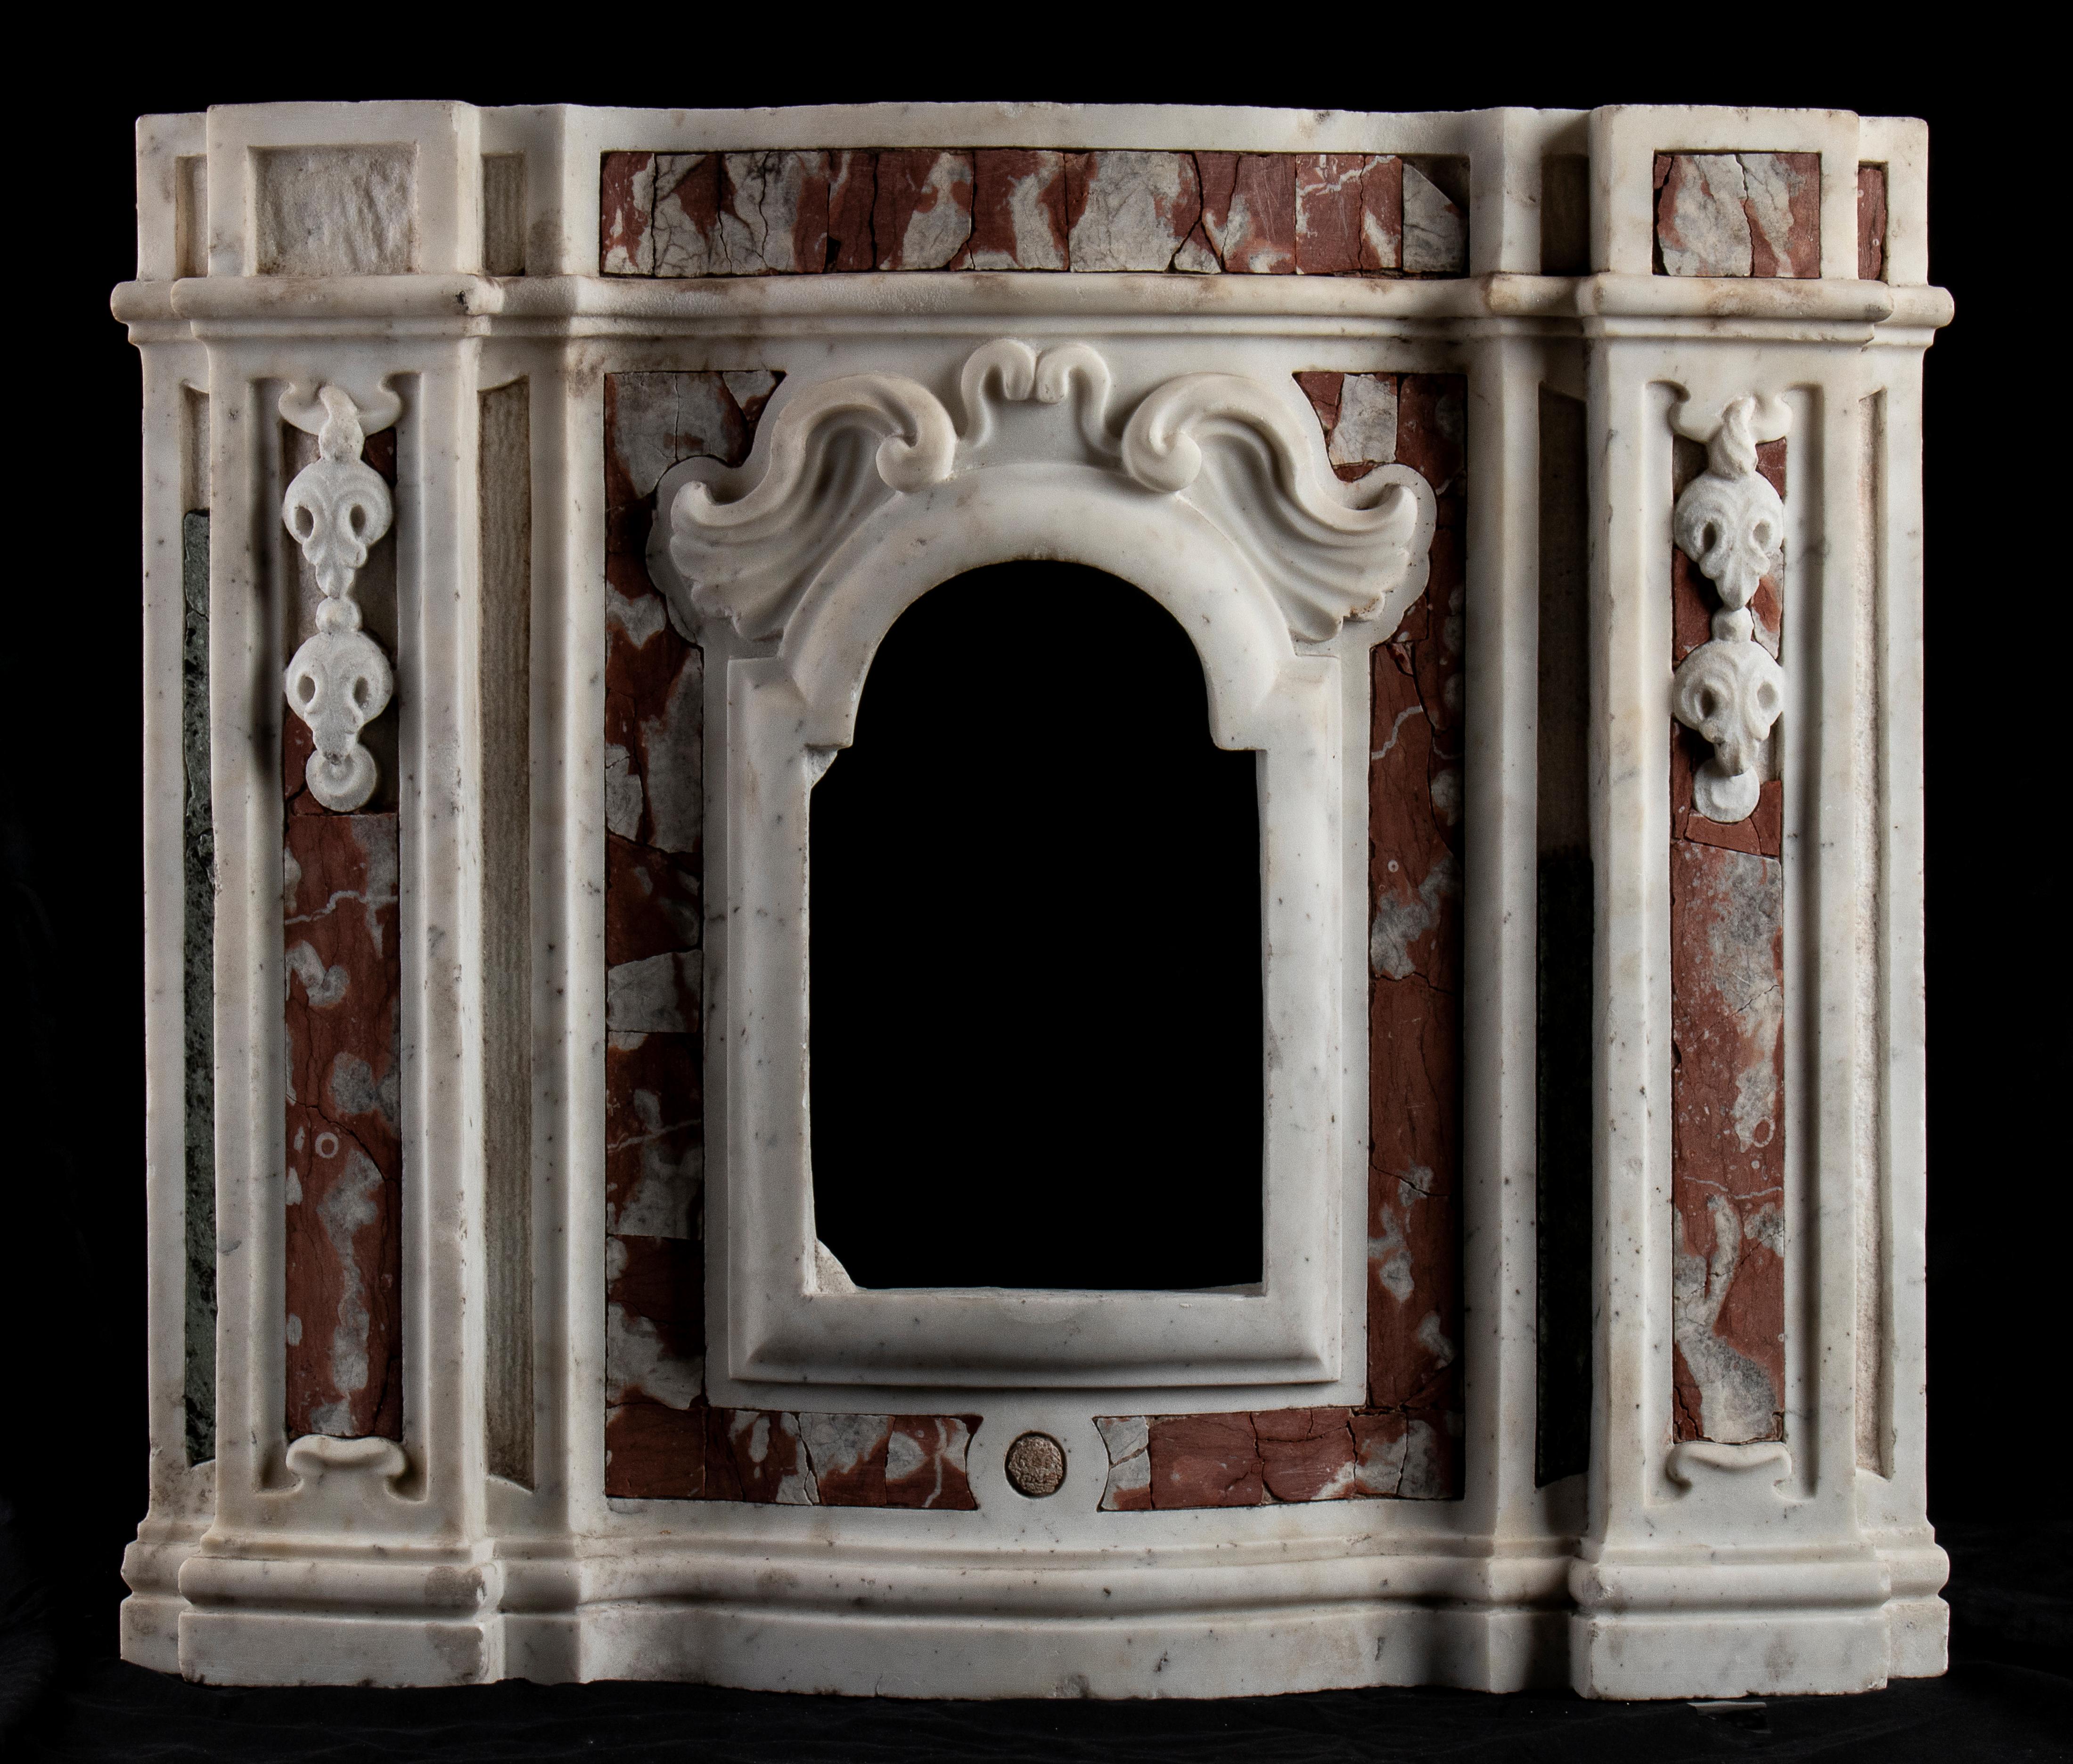 Unknown Figurative Sculpture - An Italian Antique Inlaid White and Red  Marble Tabernacle High Relief Sculpture